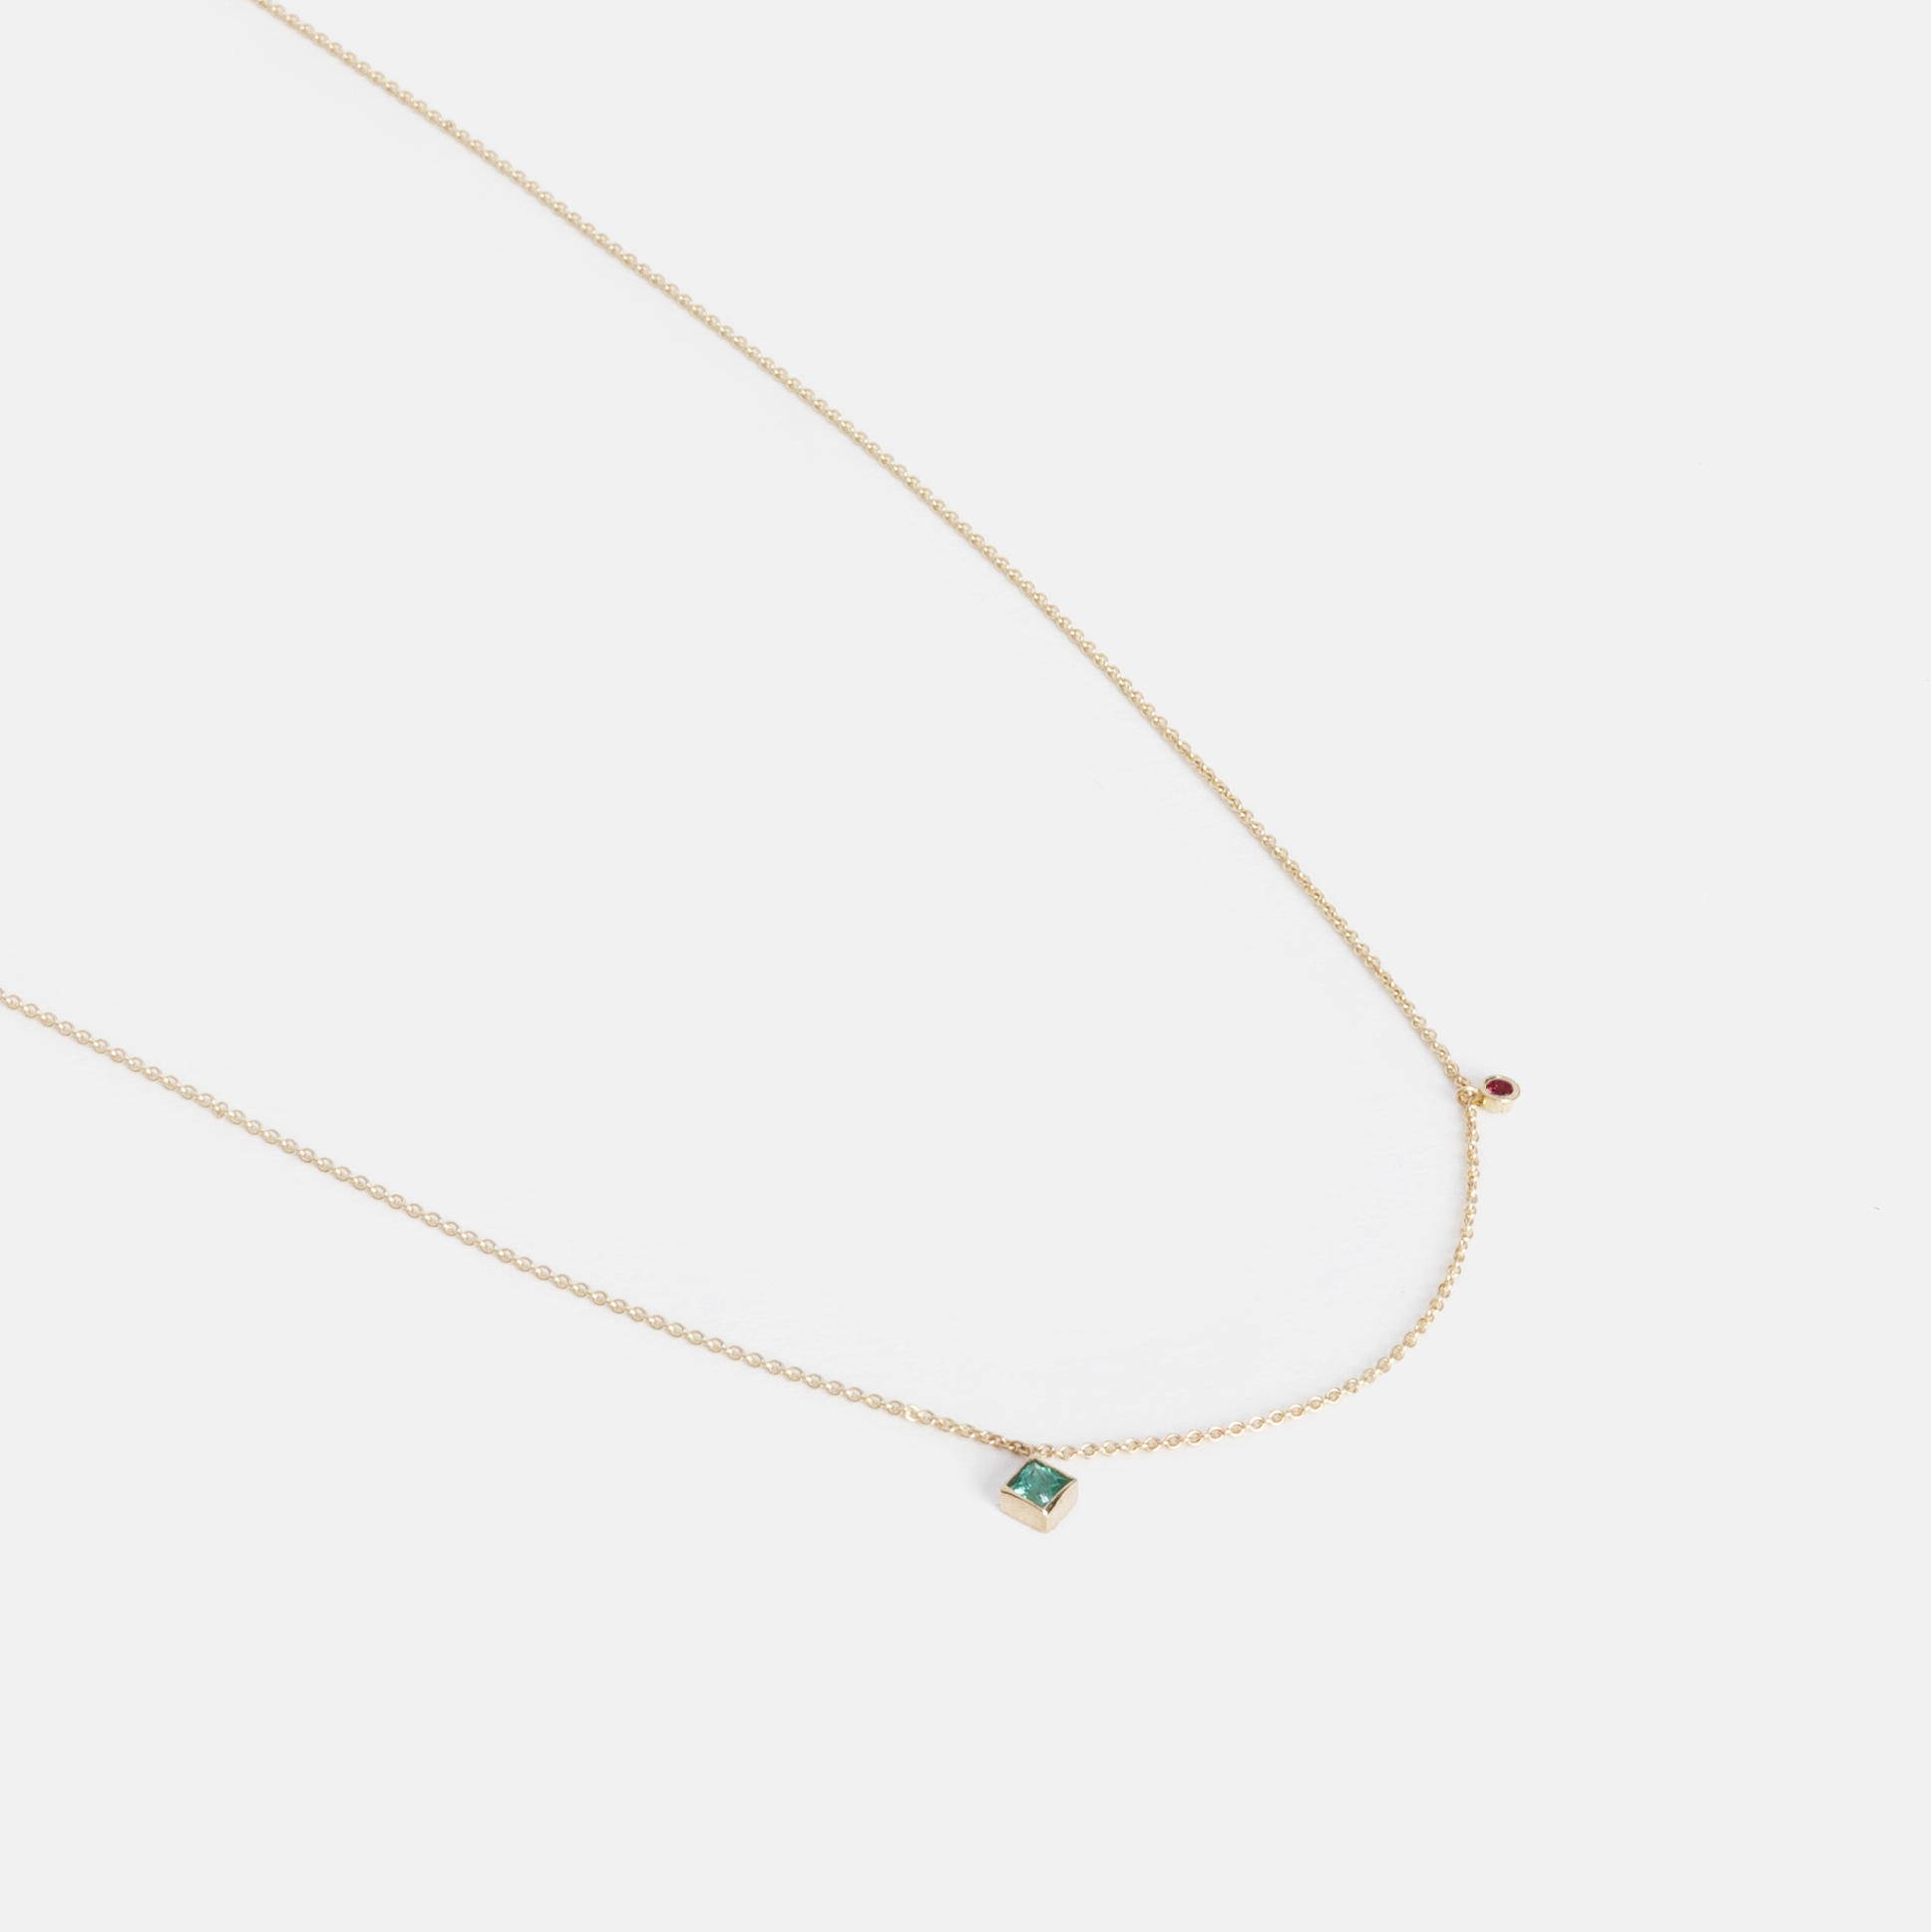 Ibi Delicate Necklace in 14k Gold set with Emerald and Ruby By SHW Fine Jewelry NYC